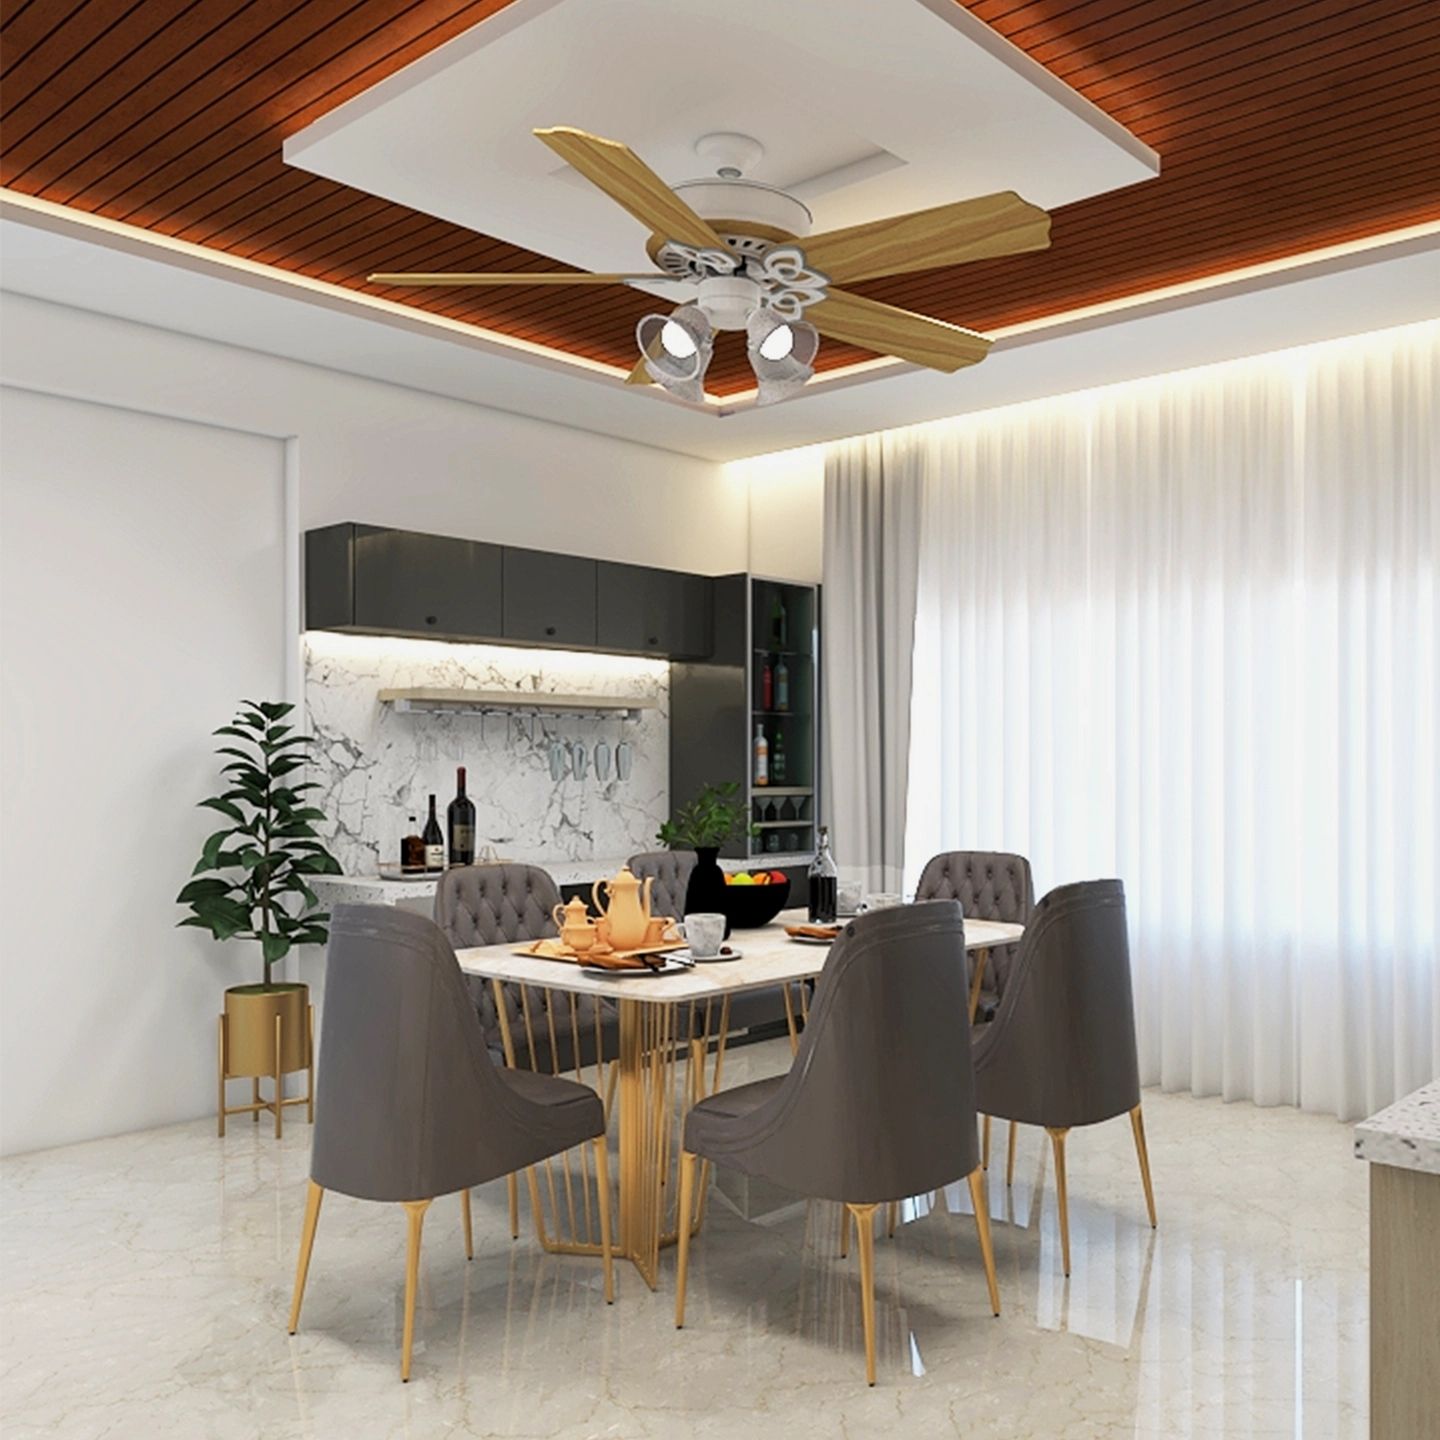 Wooden Ceiling 6-Seater Modern Dining Room Design with Crockery Unit - Livspace